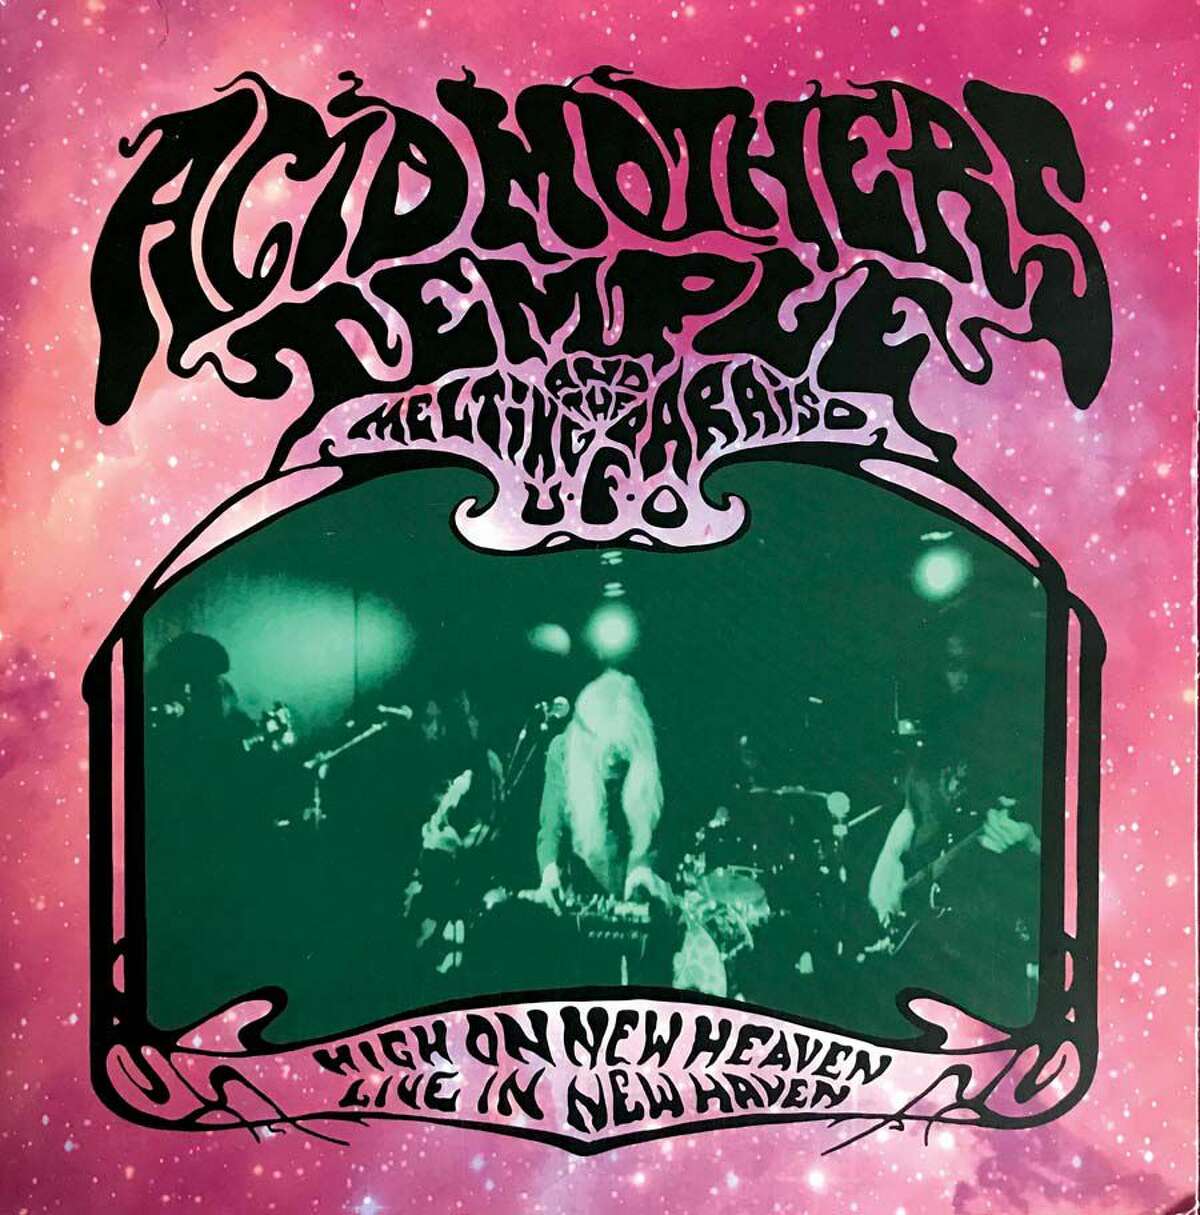 Live in New Haven by Acid Mothers Temple (Safety Meeting Records).